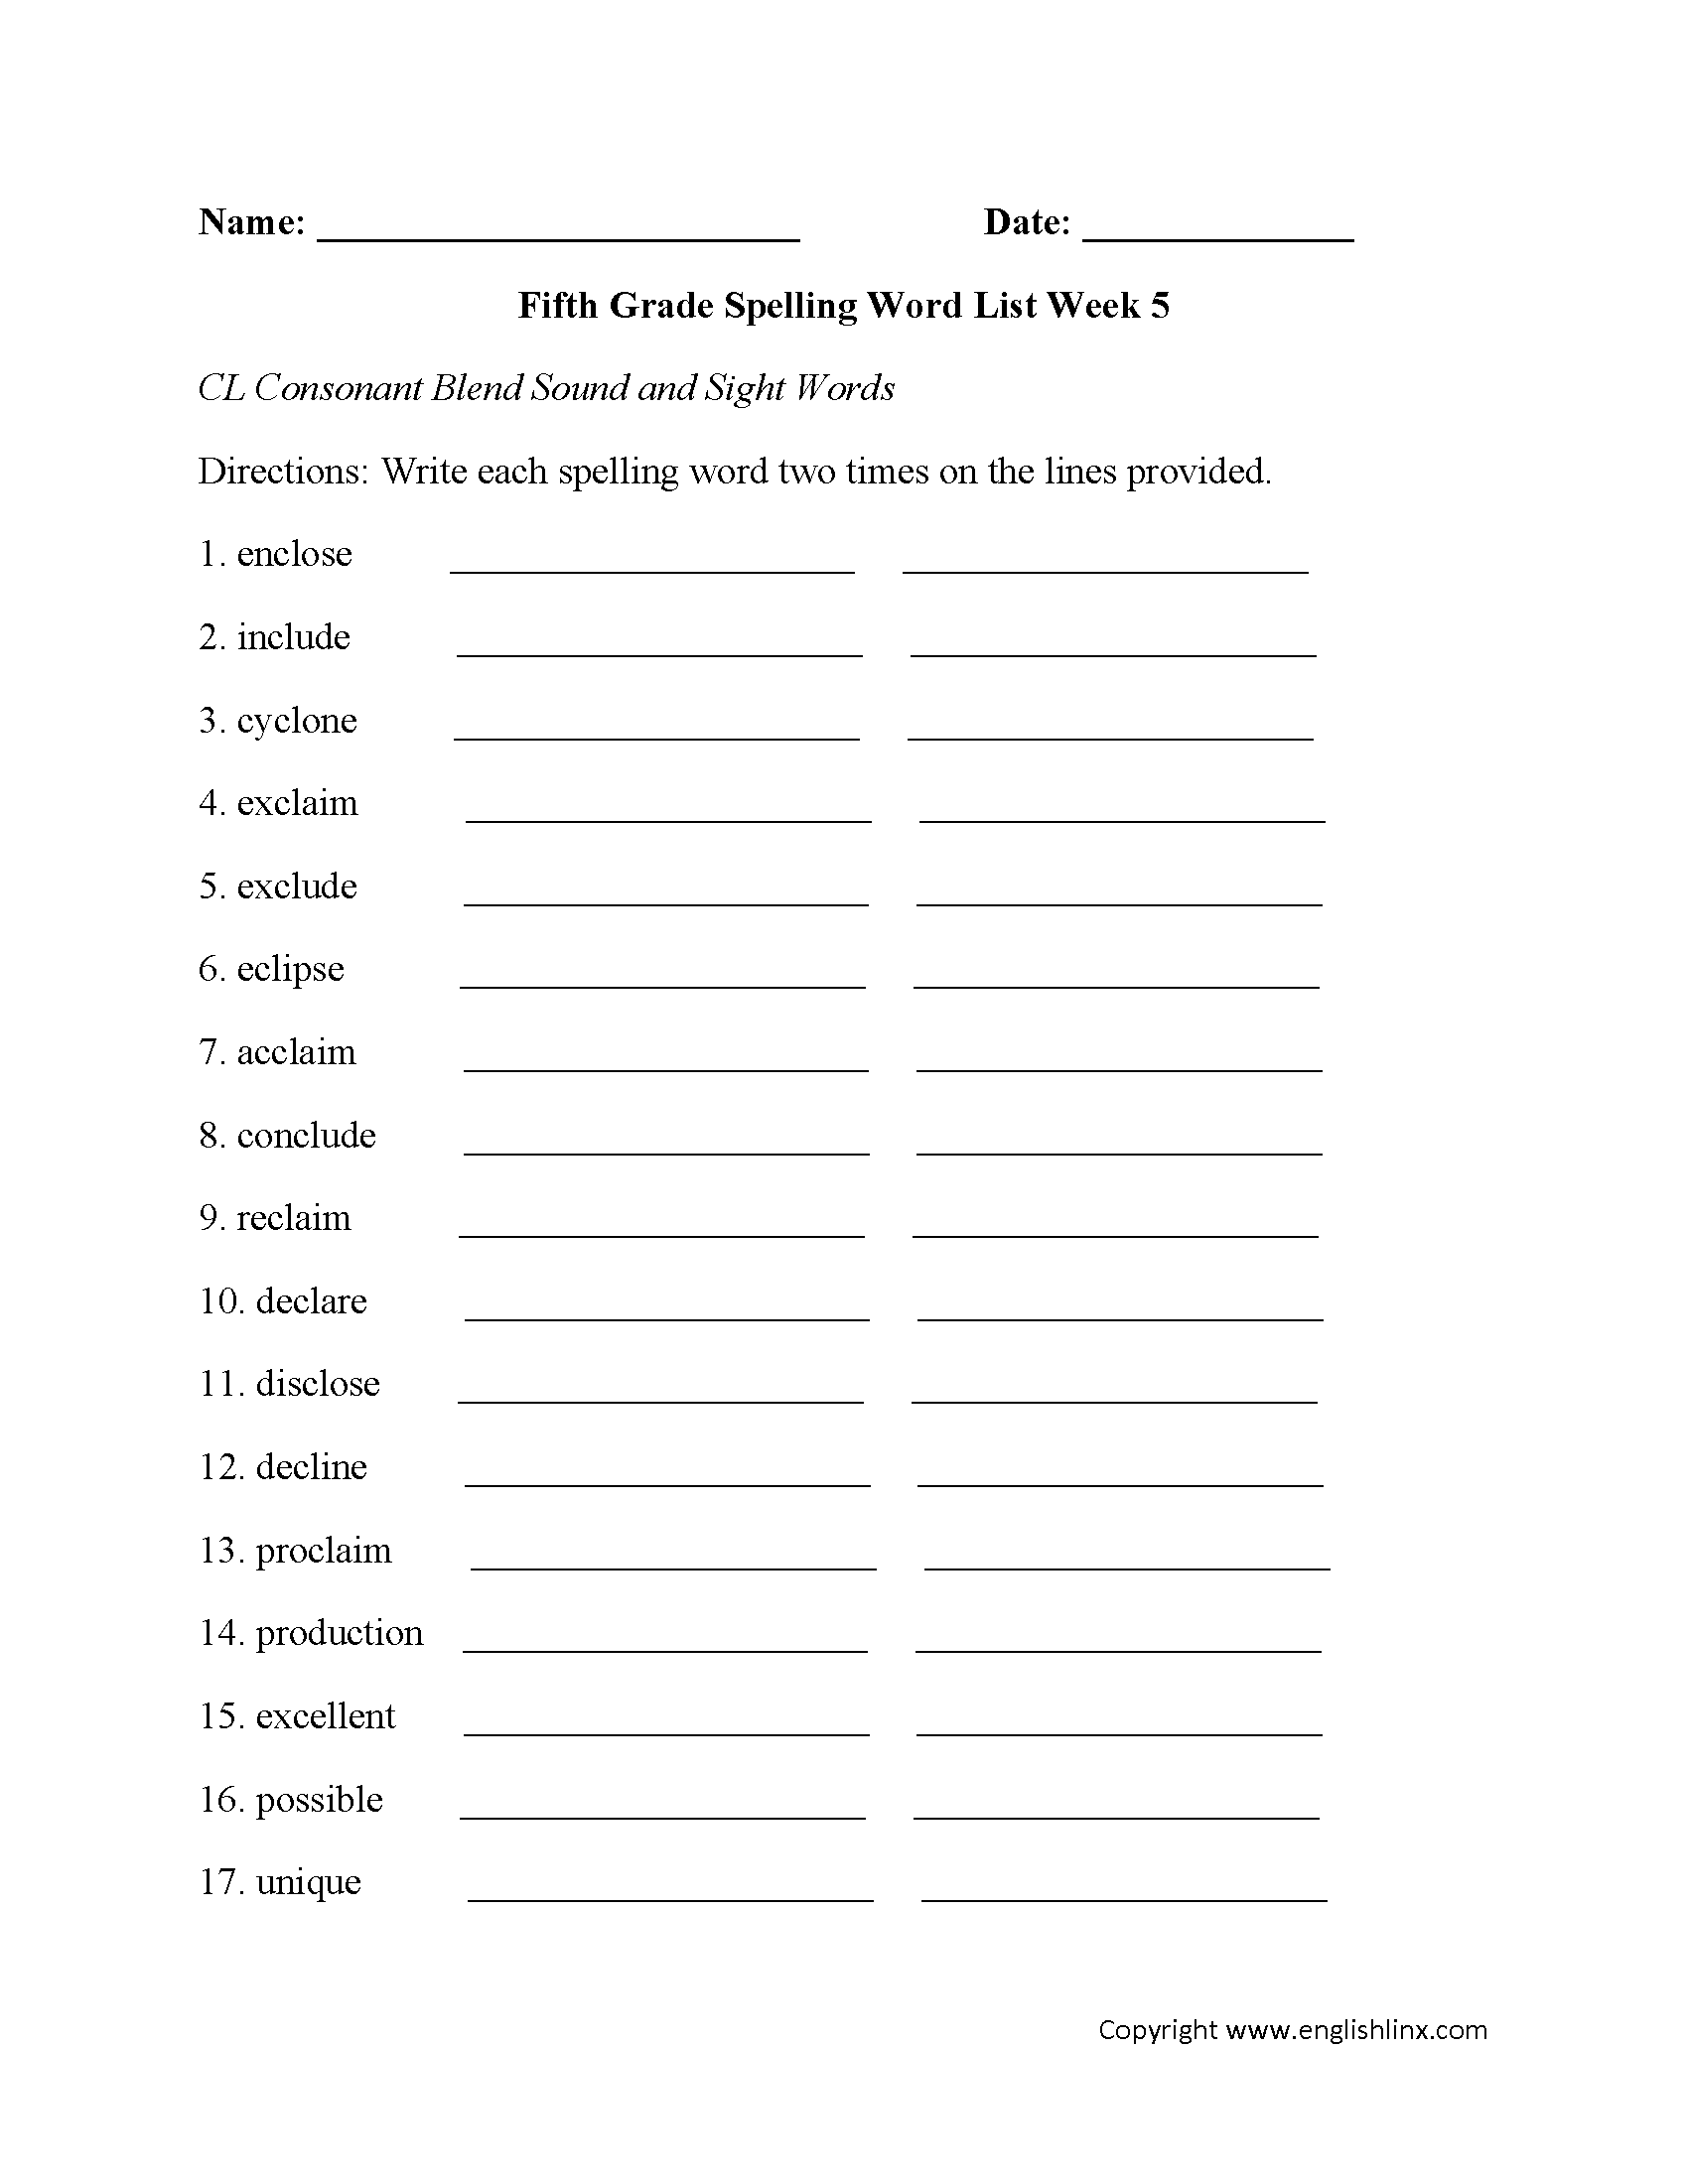 Week 5 CL Consonant Blend and Sight Words Fifth Grade Spelling Words Worksheets